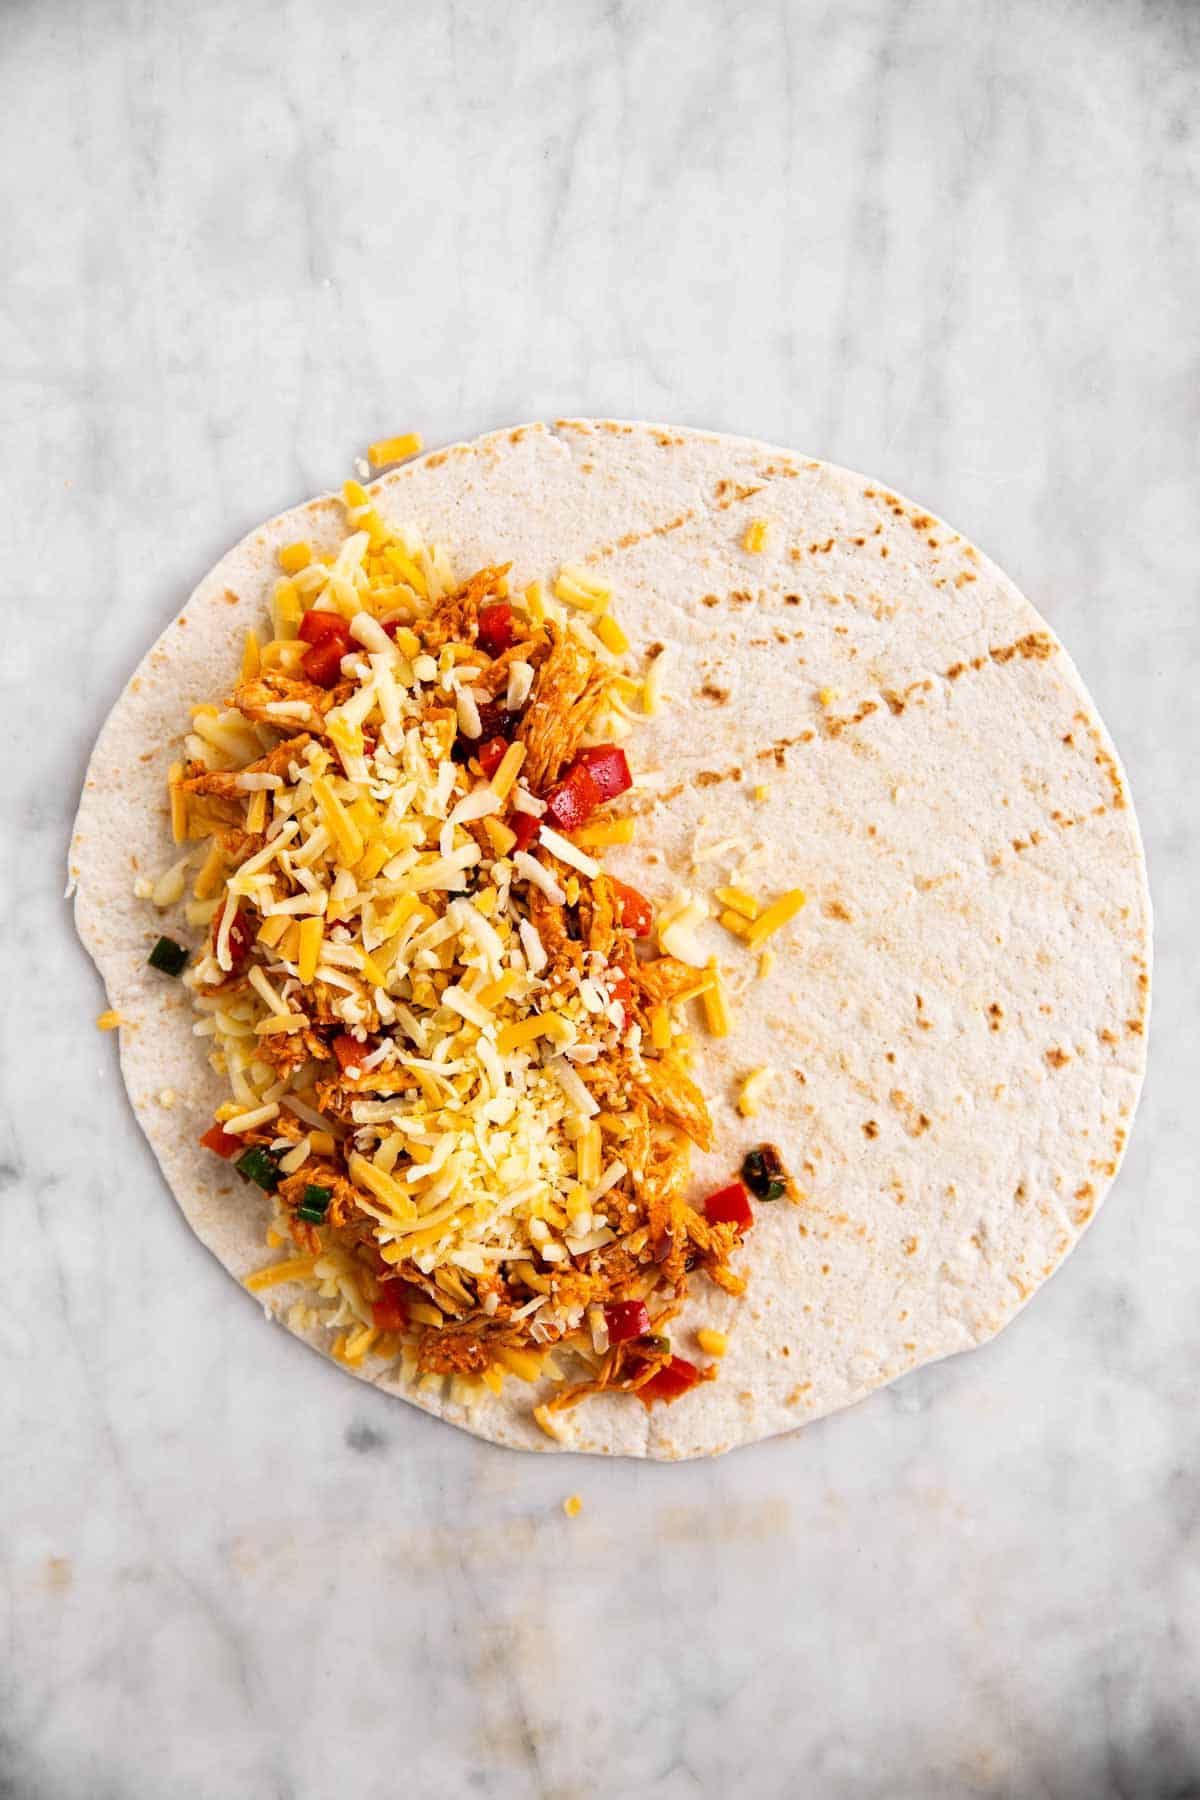 tortilla wrap with chicken quesadilla filling topped with shredded cheese on one half